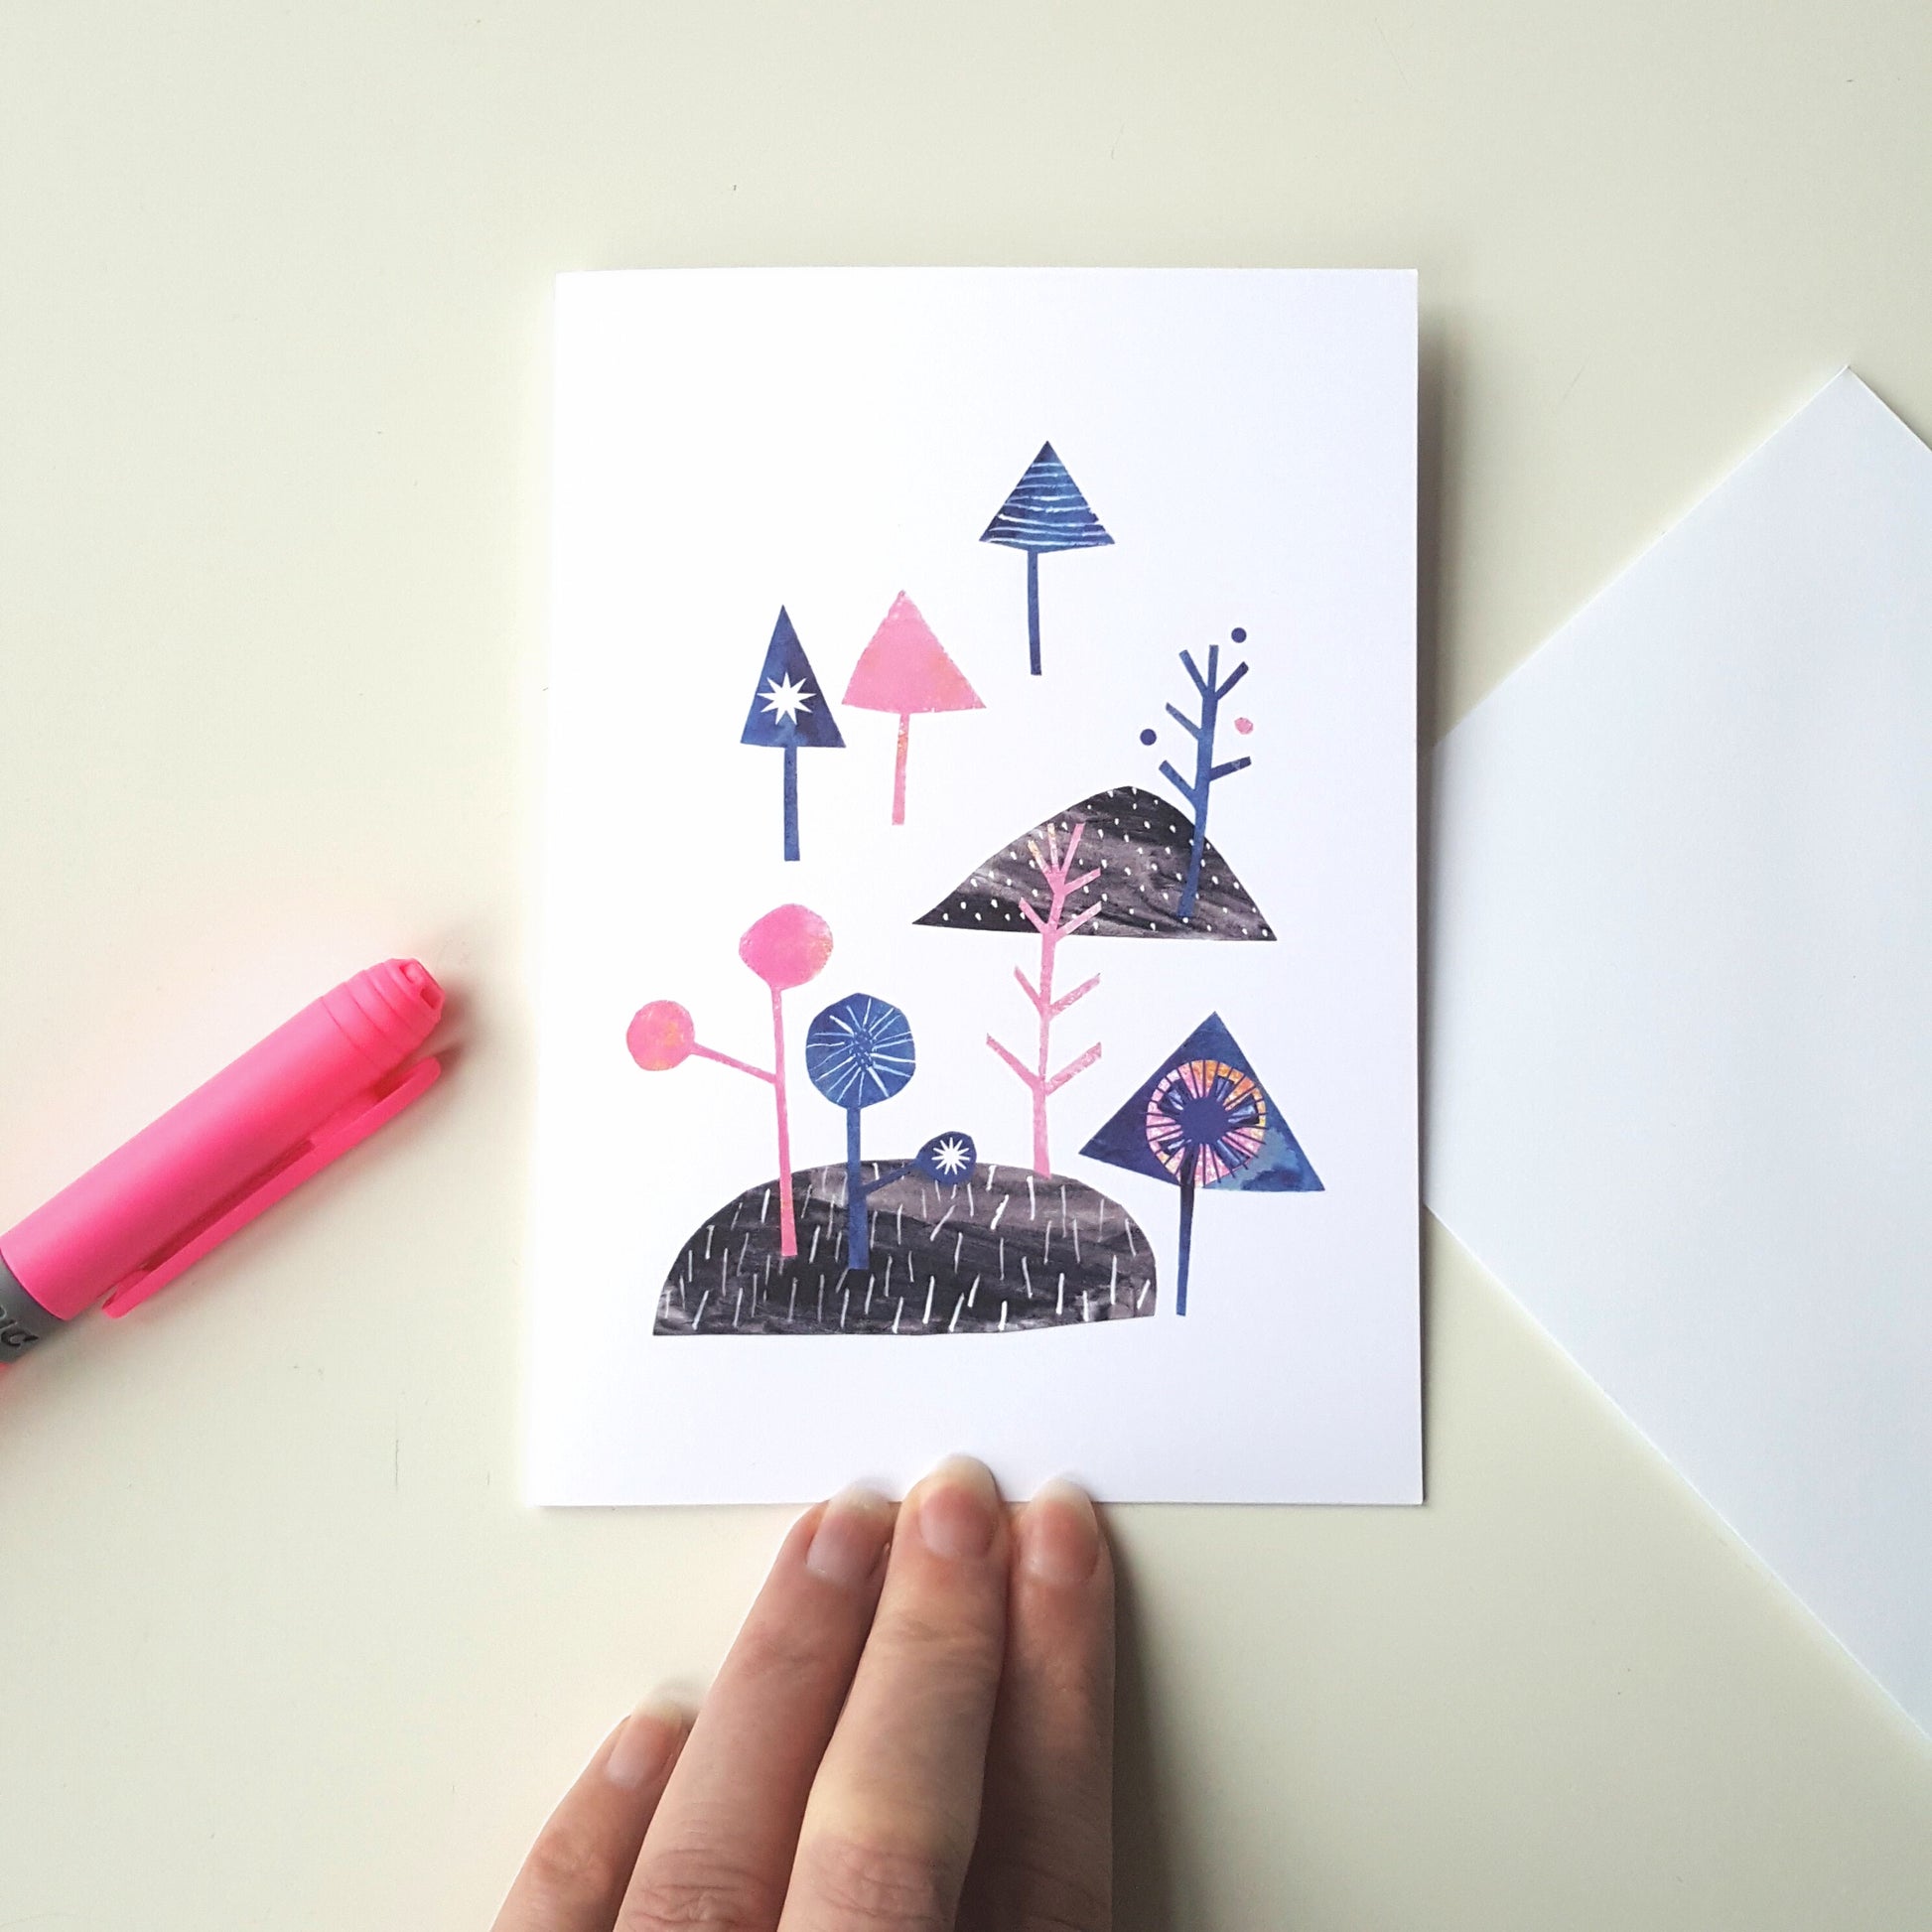 Whimsical Woods greeting card with a hand holding it down on a white table with a white envelope and neon pink pen lying beside it.